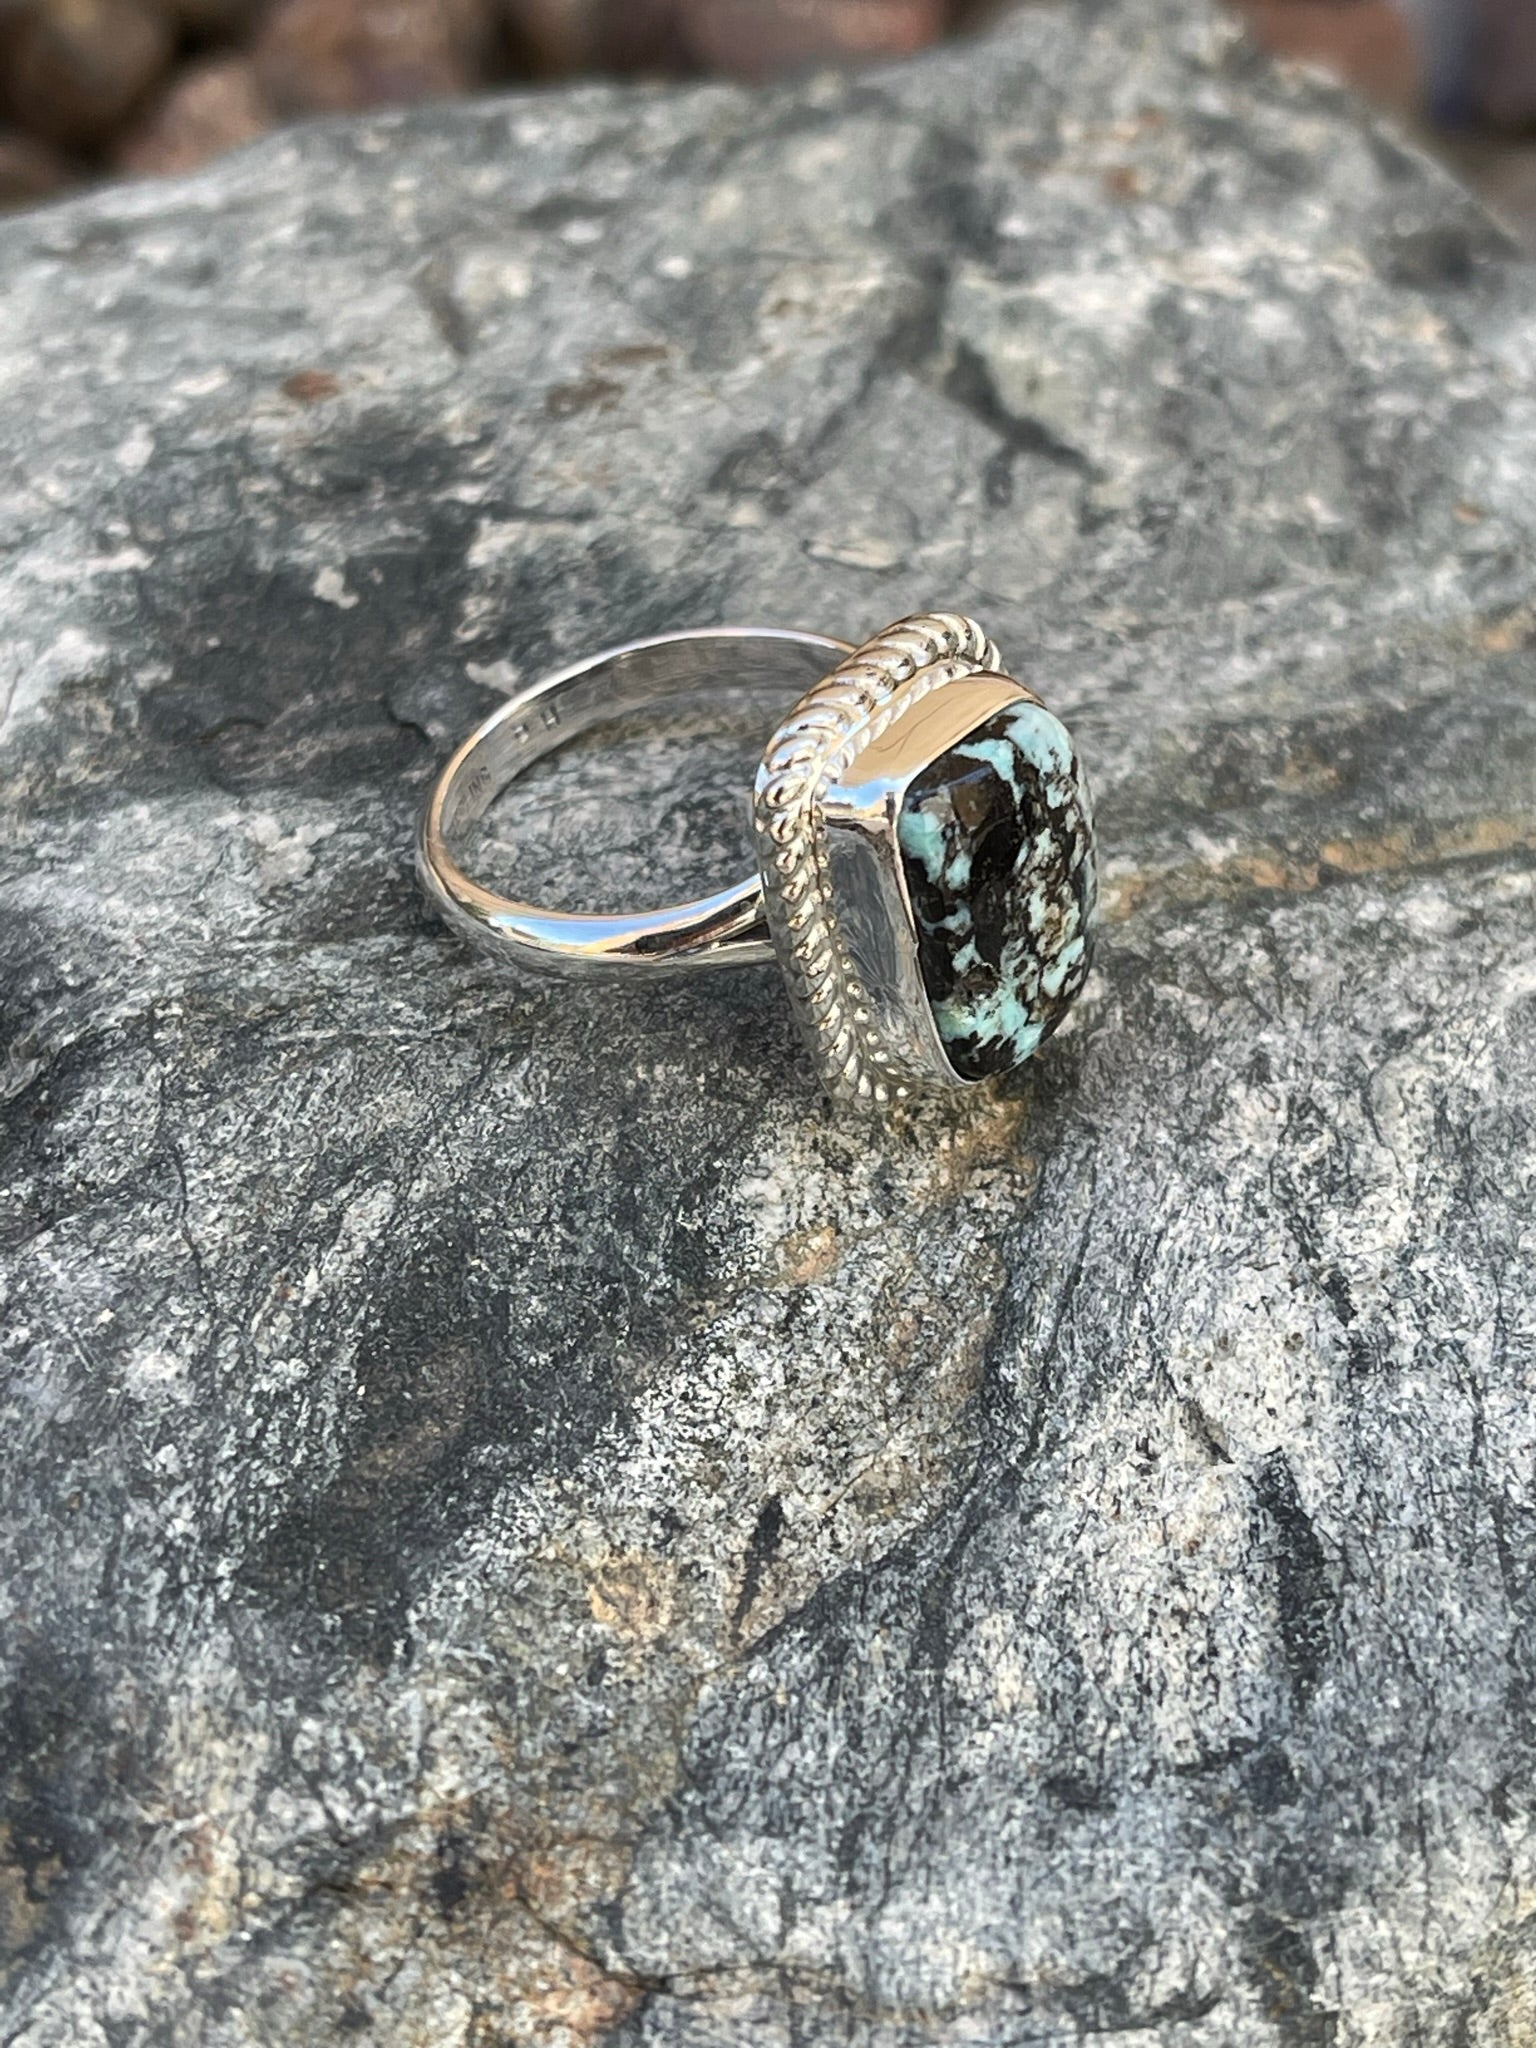 Hand Crafted Solid Sterling Silver Stormy Mountain Turquoise Ring with Twist Trim- Size 7 1/2